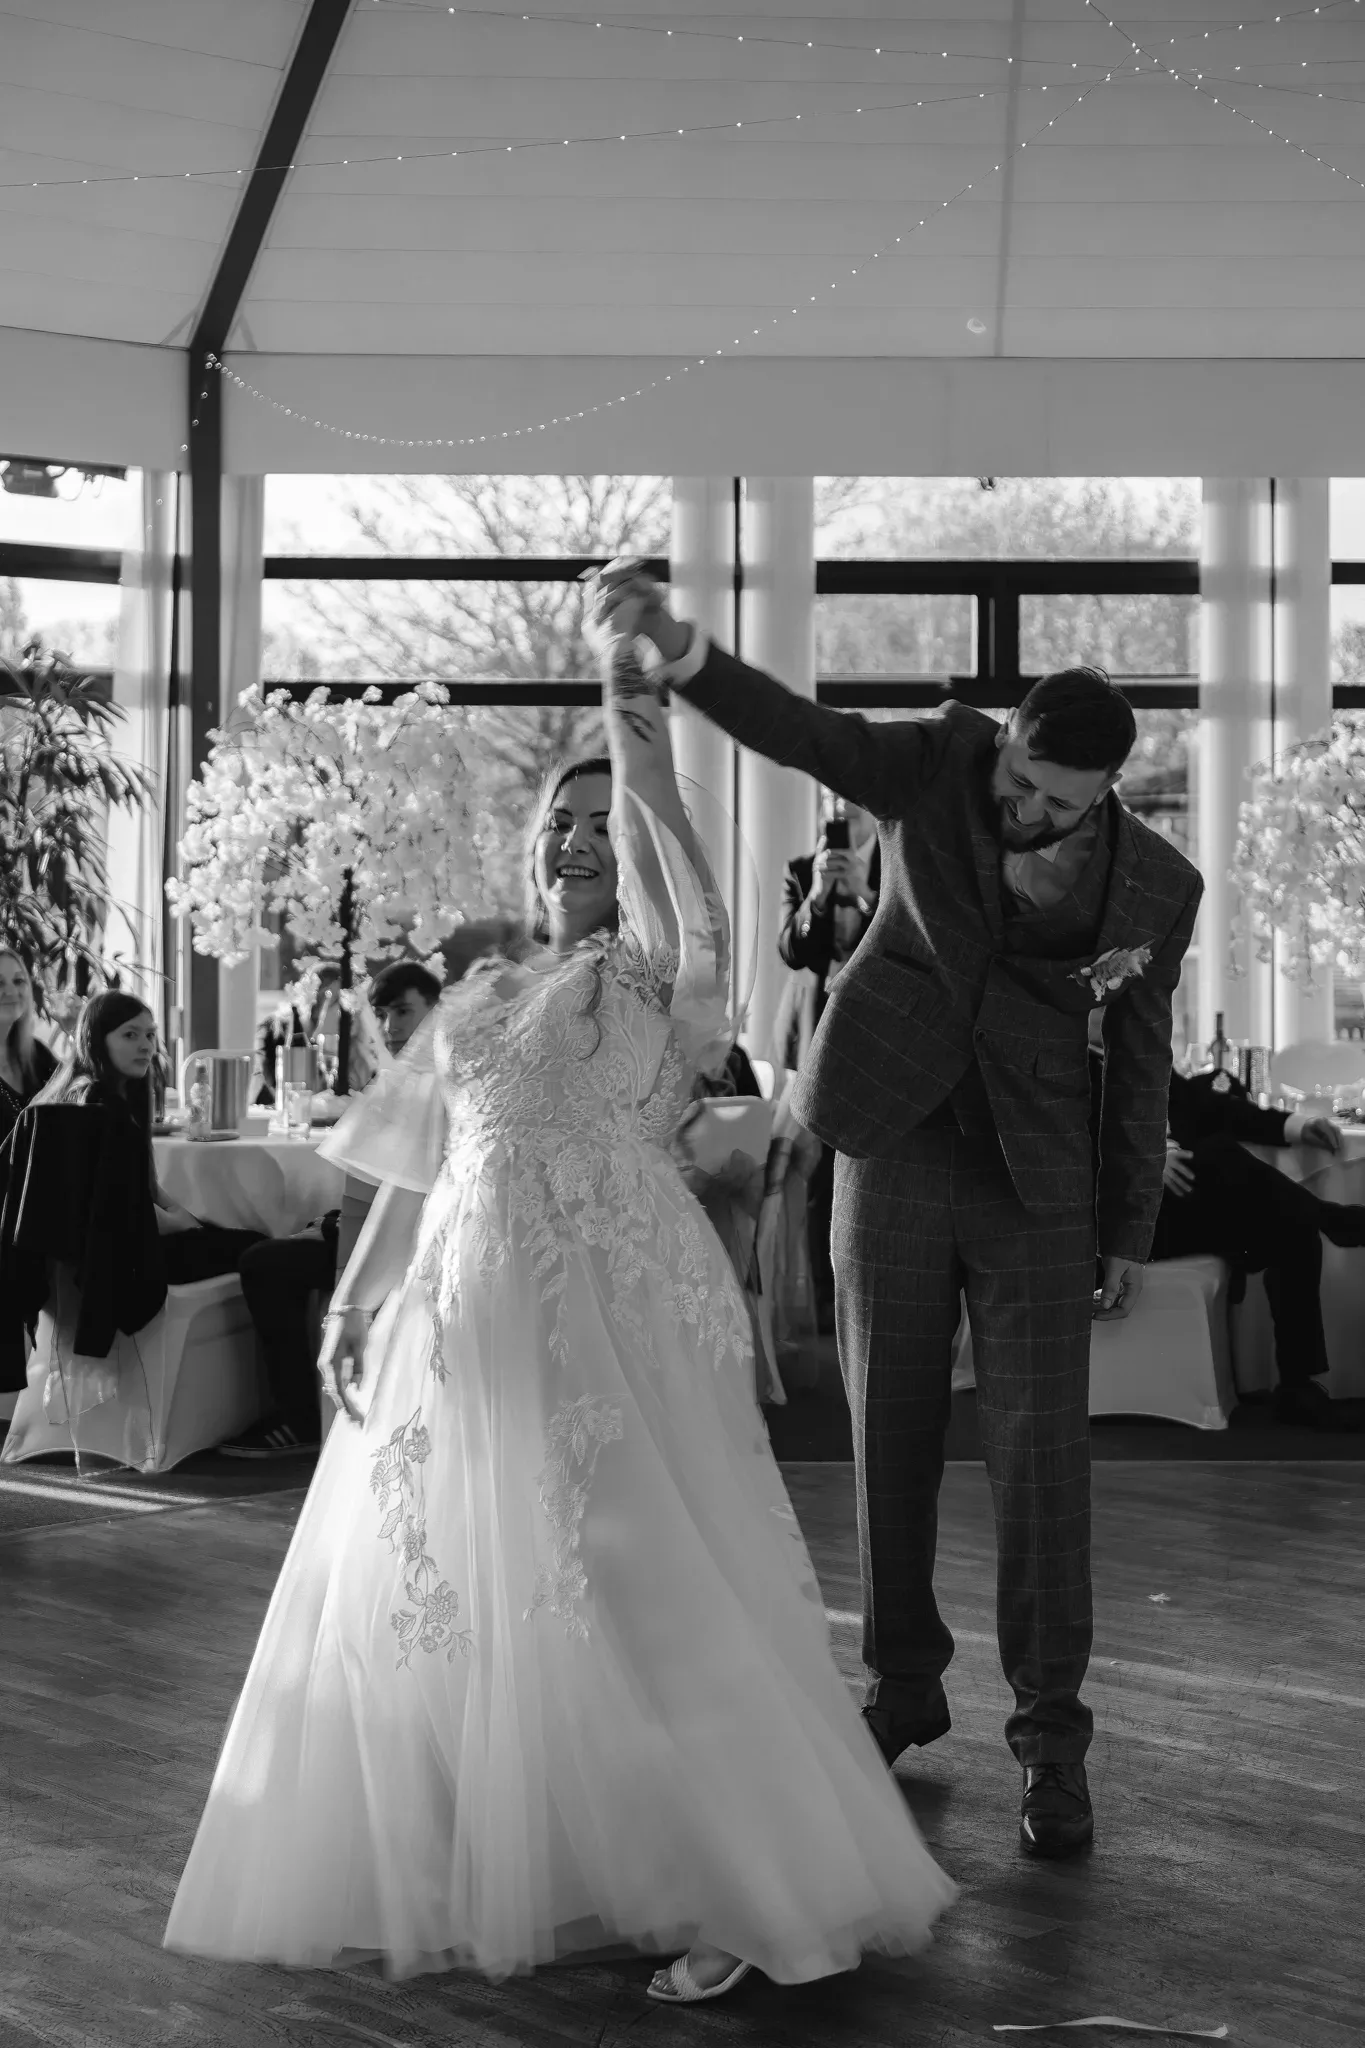 A joyful bride and groom share their first dance, the bride in a lace gown and the groom in a tweed suit. they dance under string lights in a room with guests seated around them, captured in black and white.